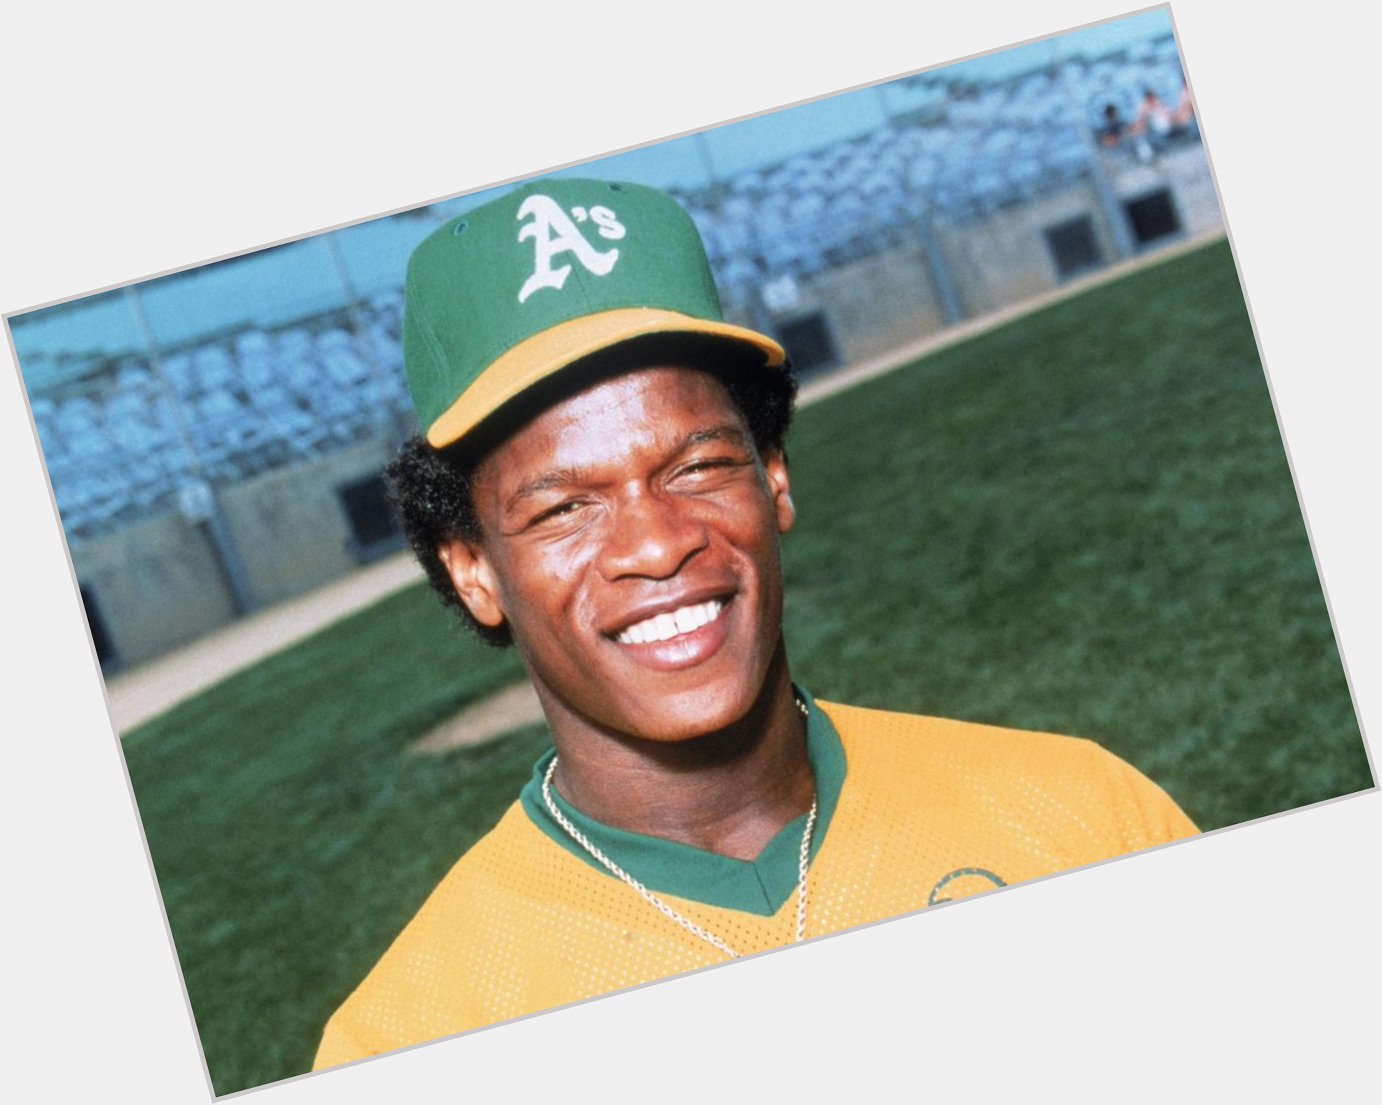 Happy birthday to one of the all time greats, Rickey Henderson! 